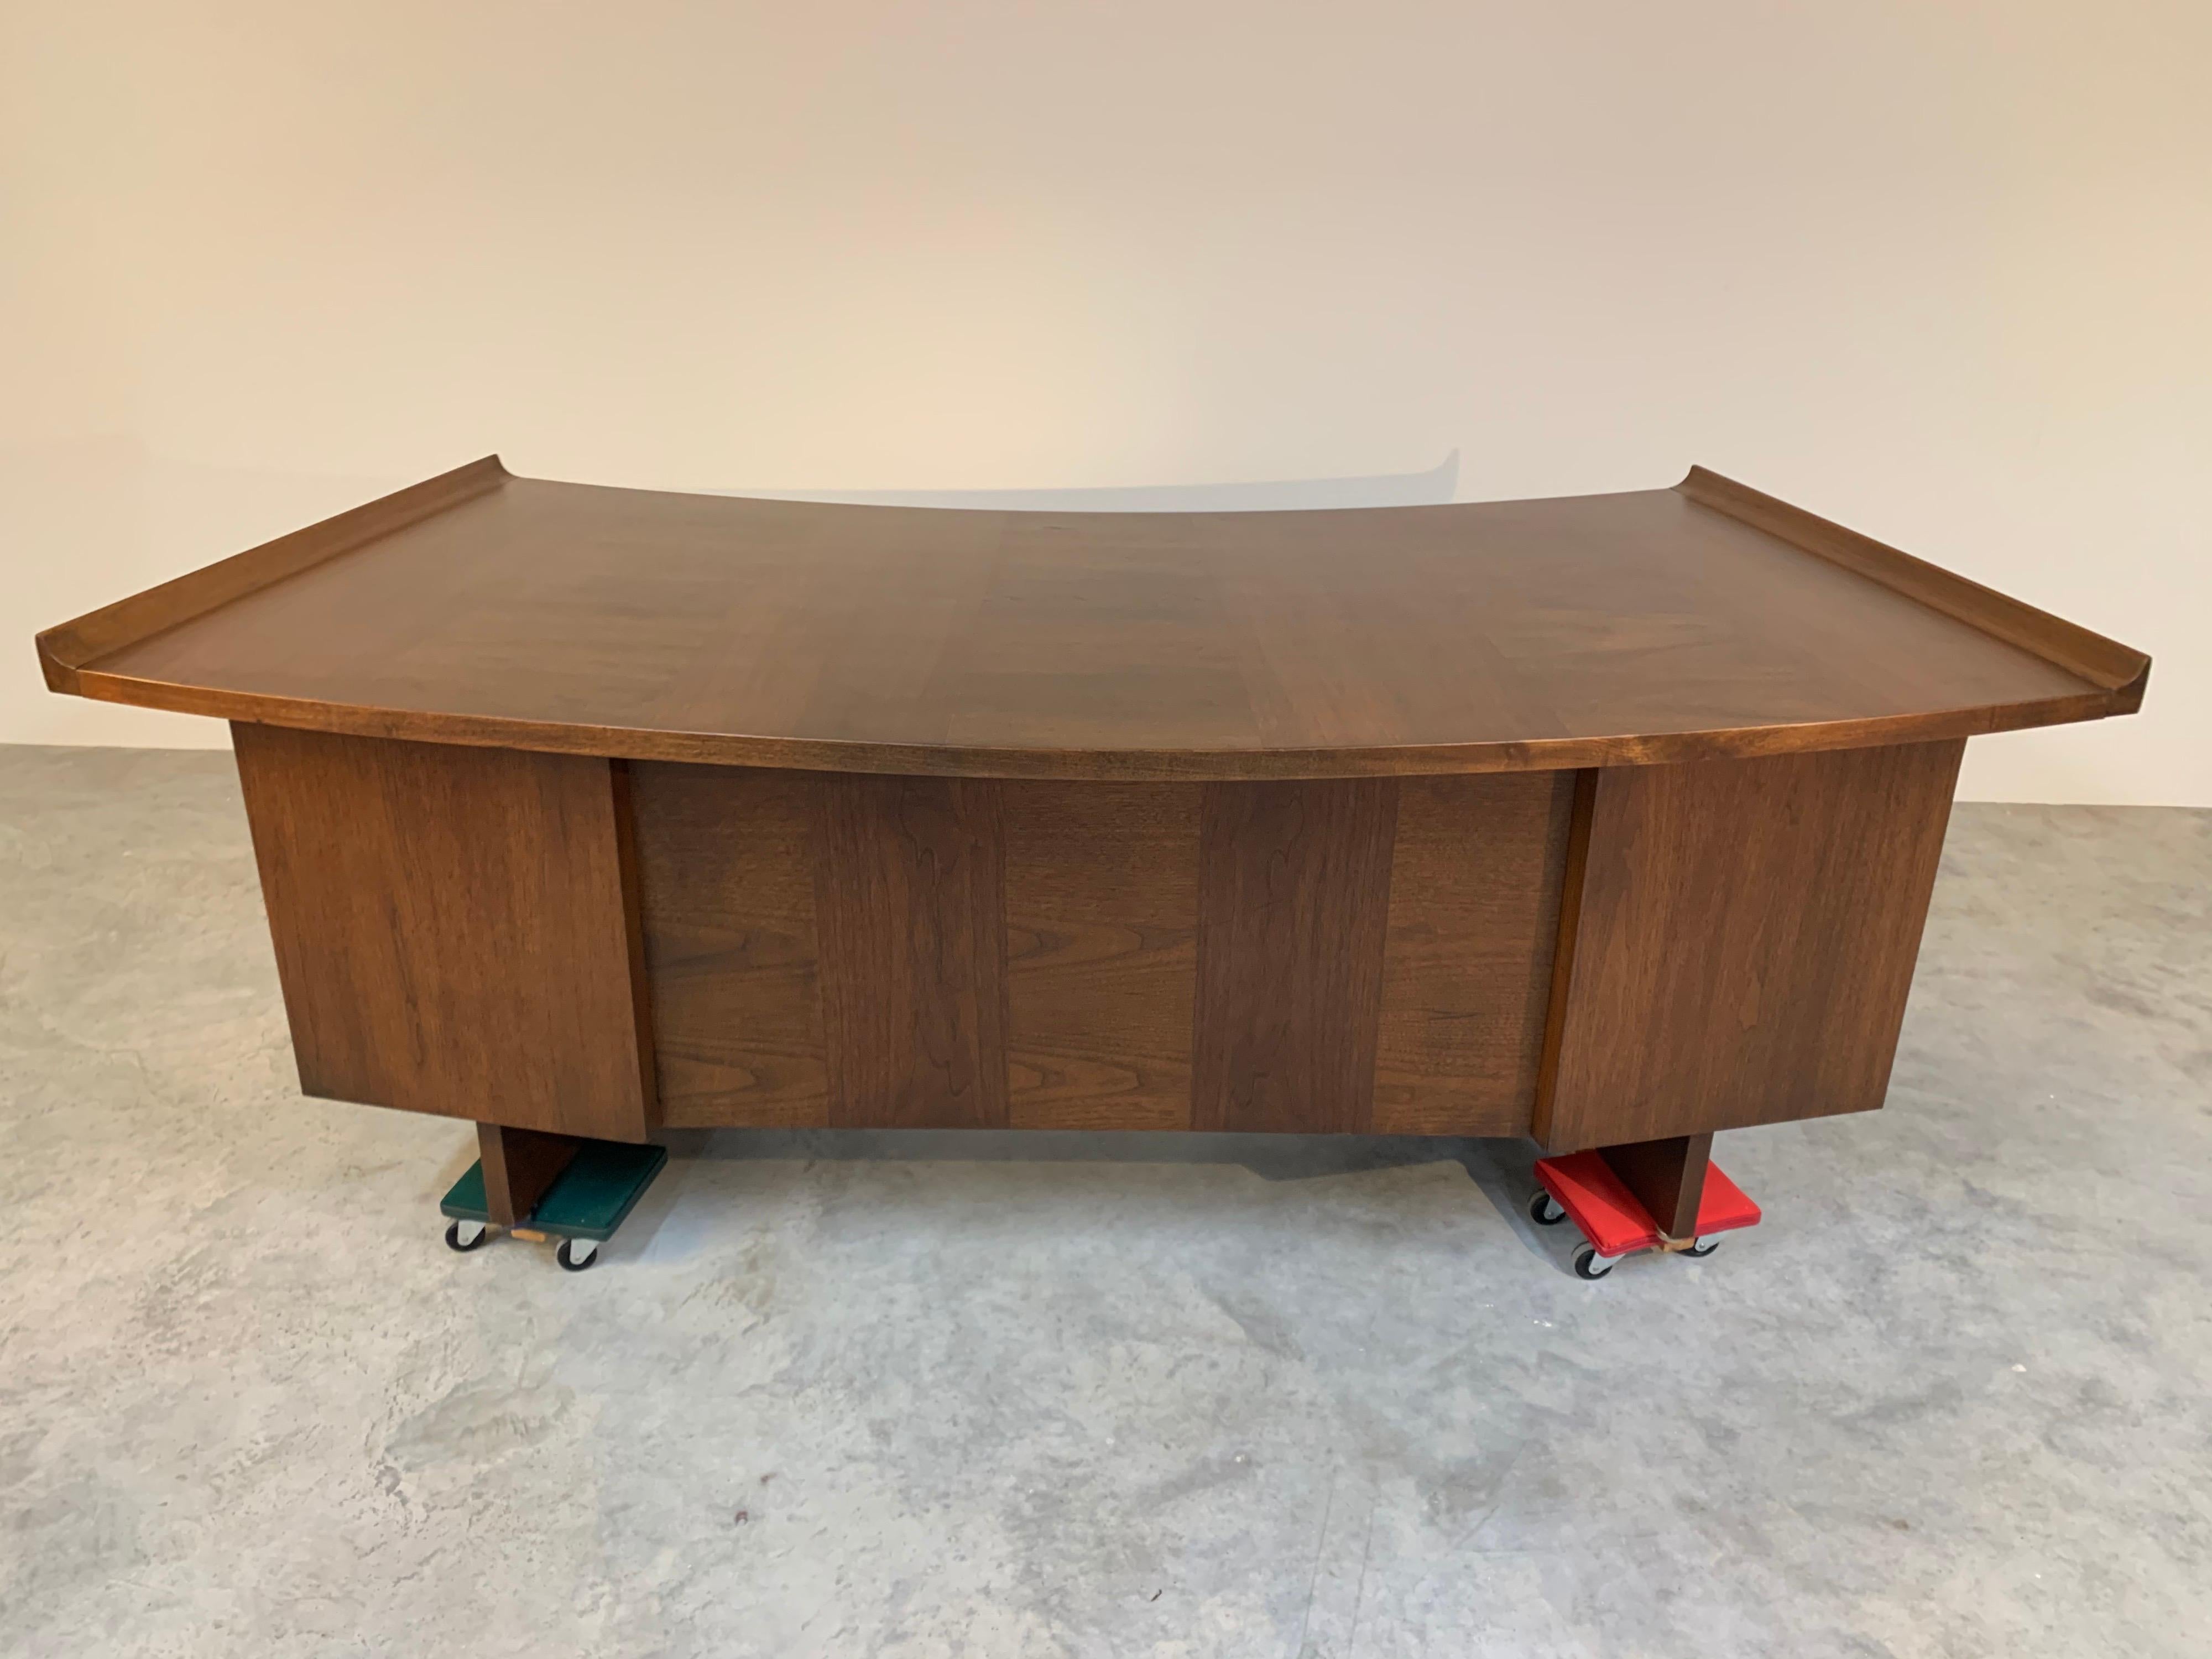 A beautiful executive desk designed by Harvey Probber in walnut.
Professionally refinished and ready for use.
(The left tray is stiff. The right tray is fine.)